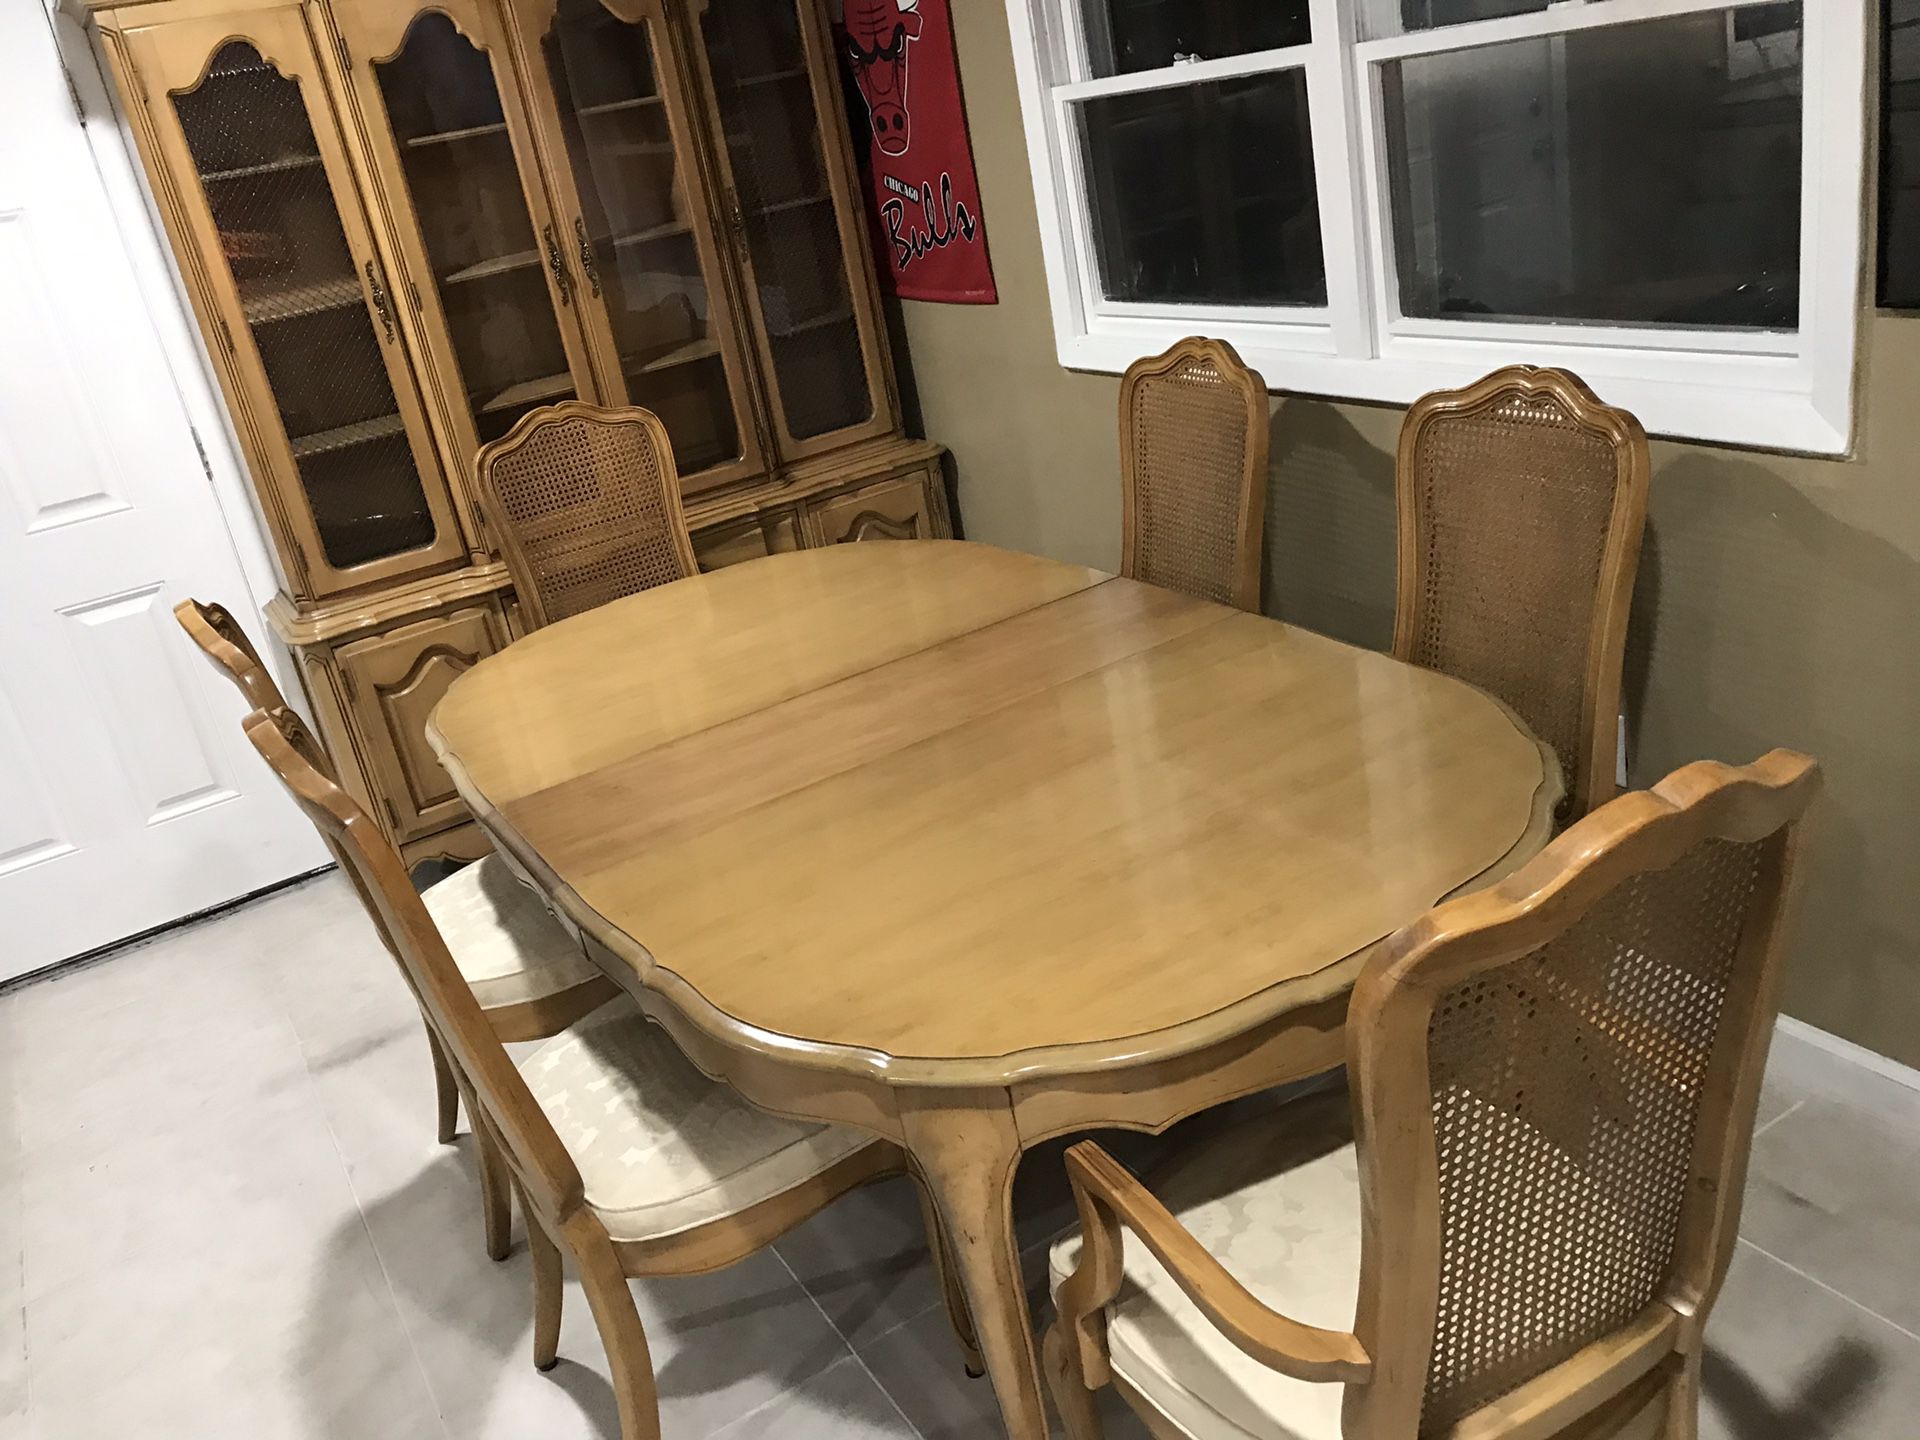 Nice vintage dining set comes with 6 chairs in great conditions